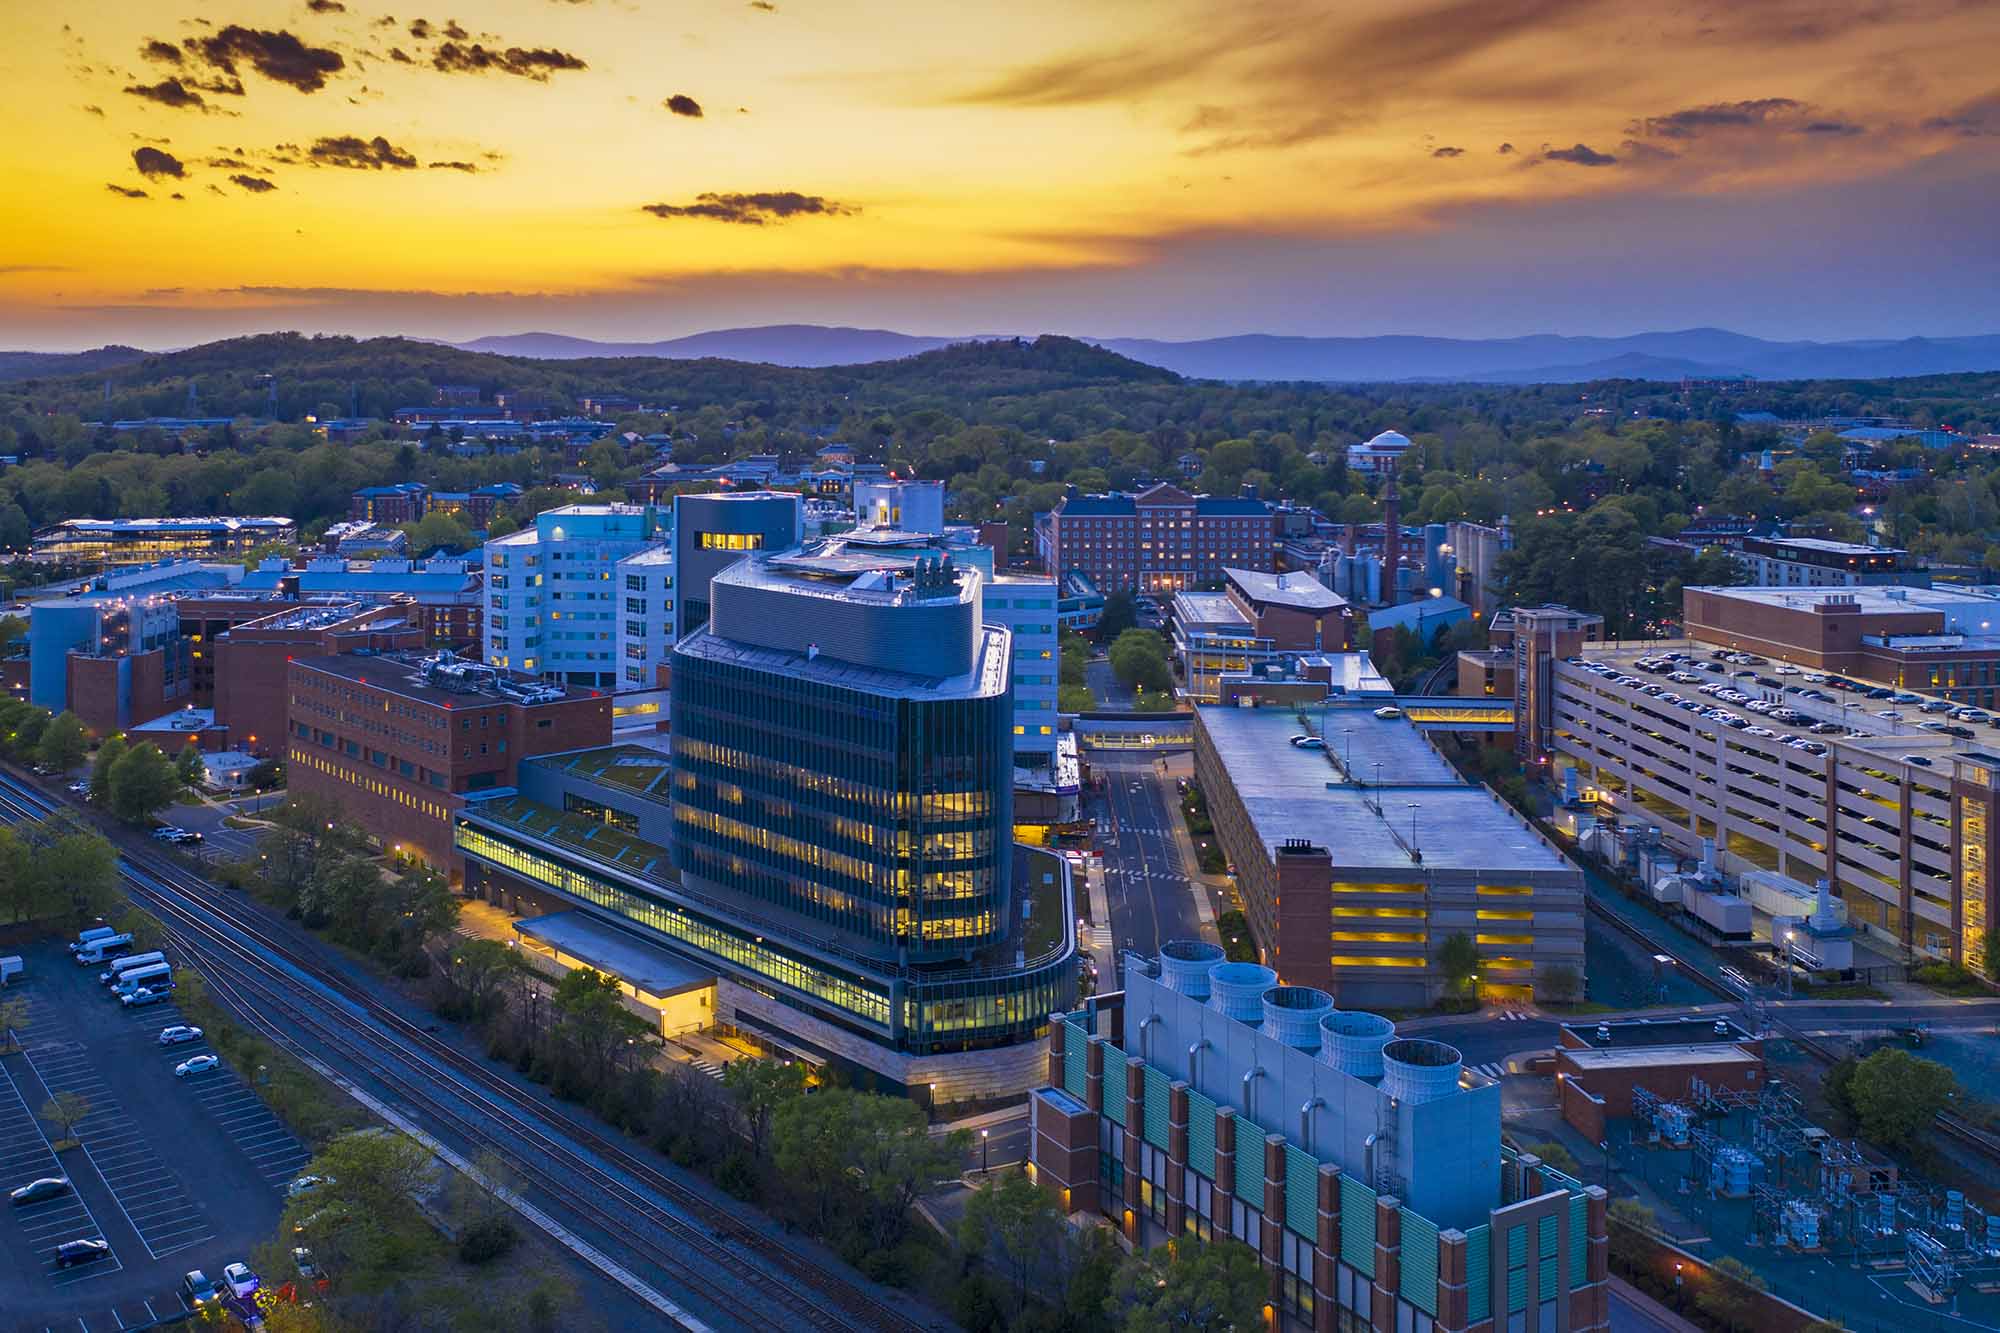 Arial View of the hospital at sunset.